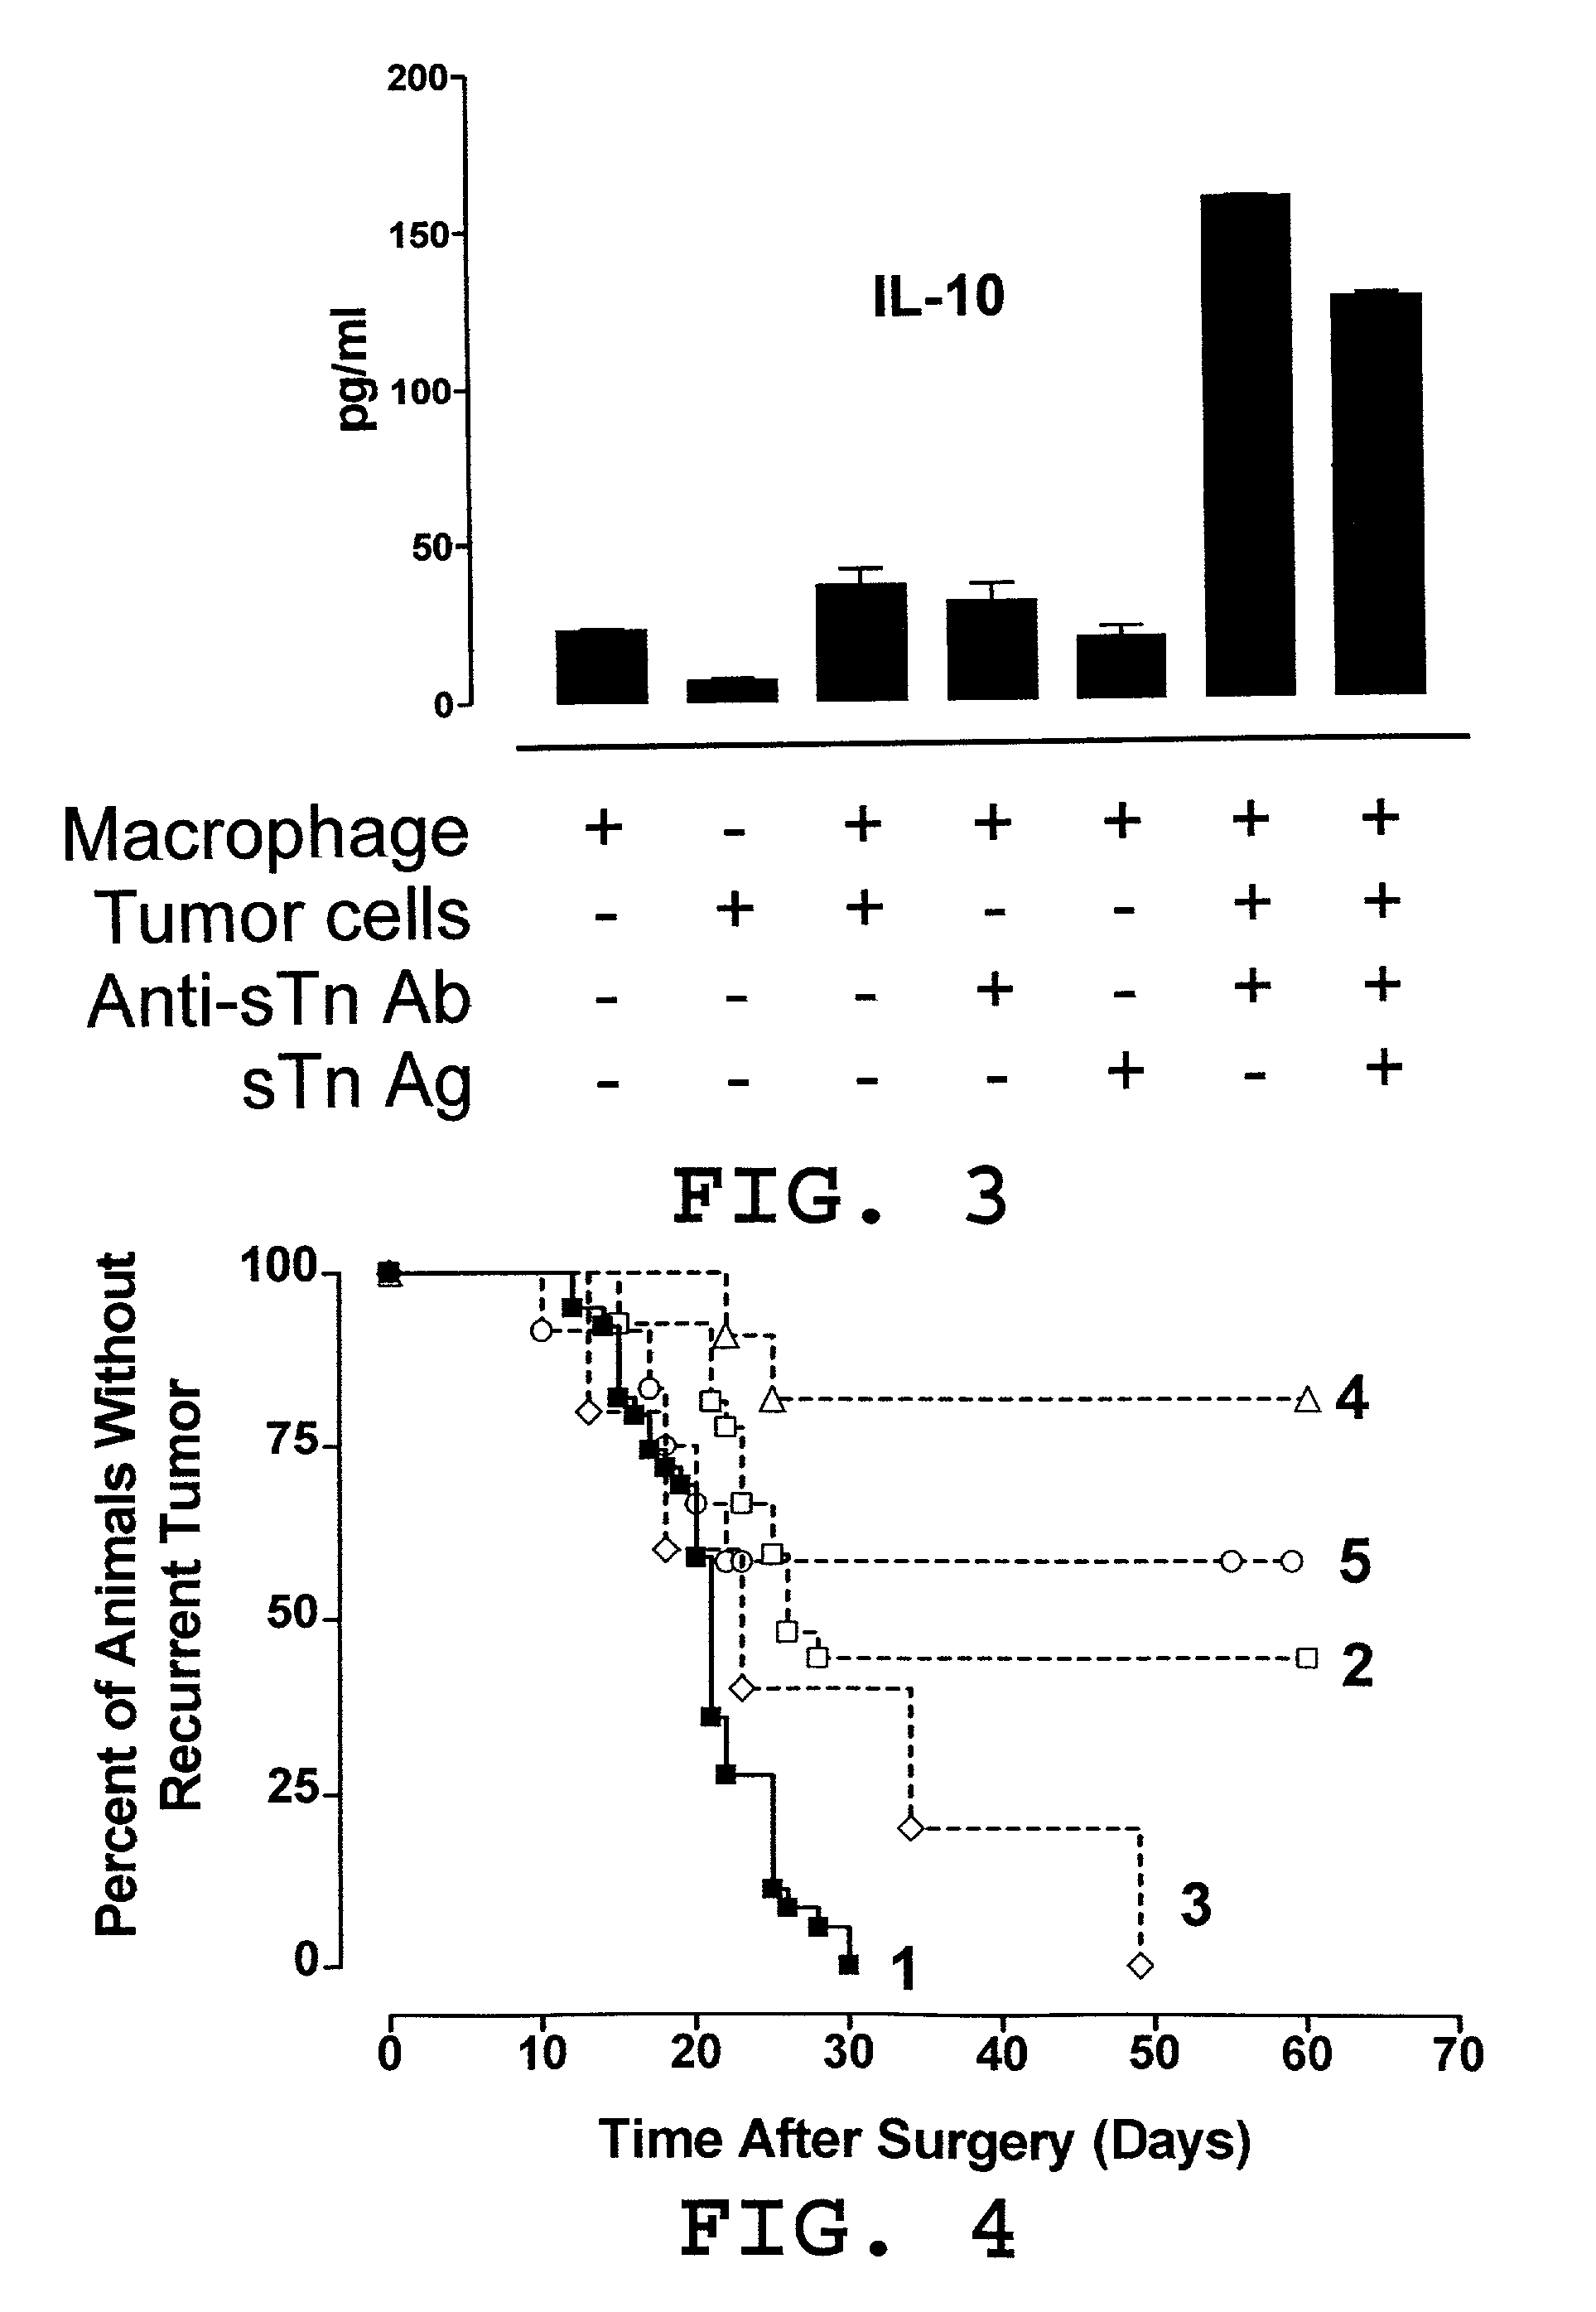 Vaccine and immunotherapy for solid nonlymphoid tumor and related immune dysregulation